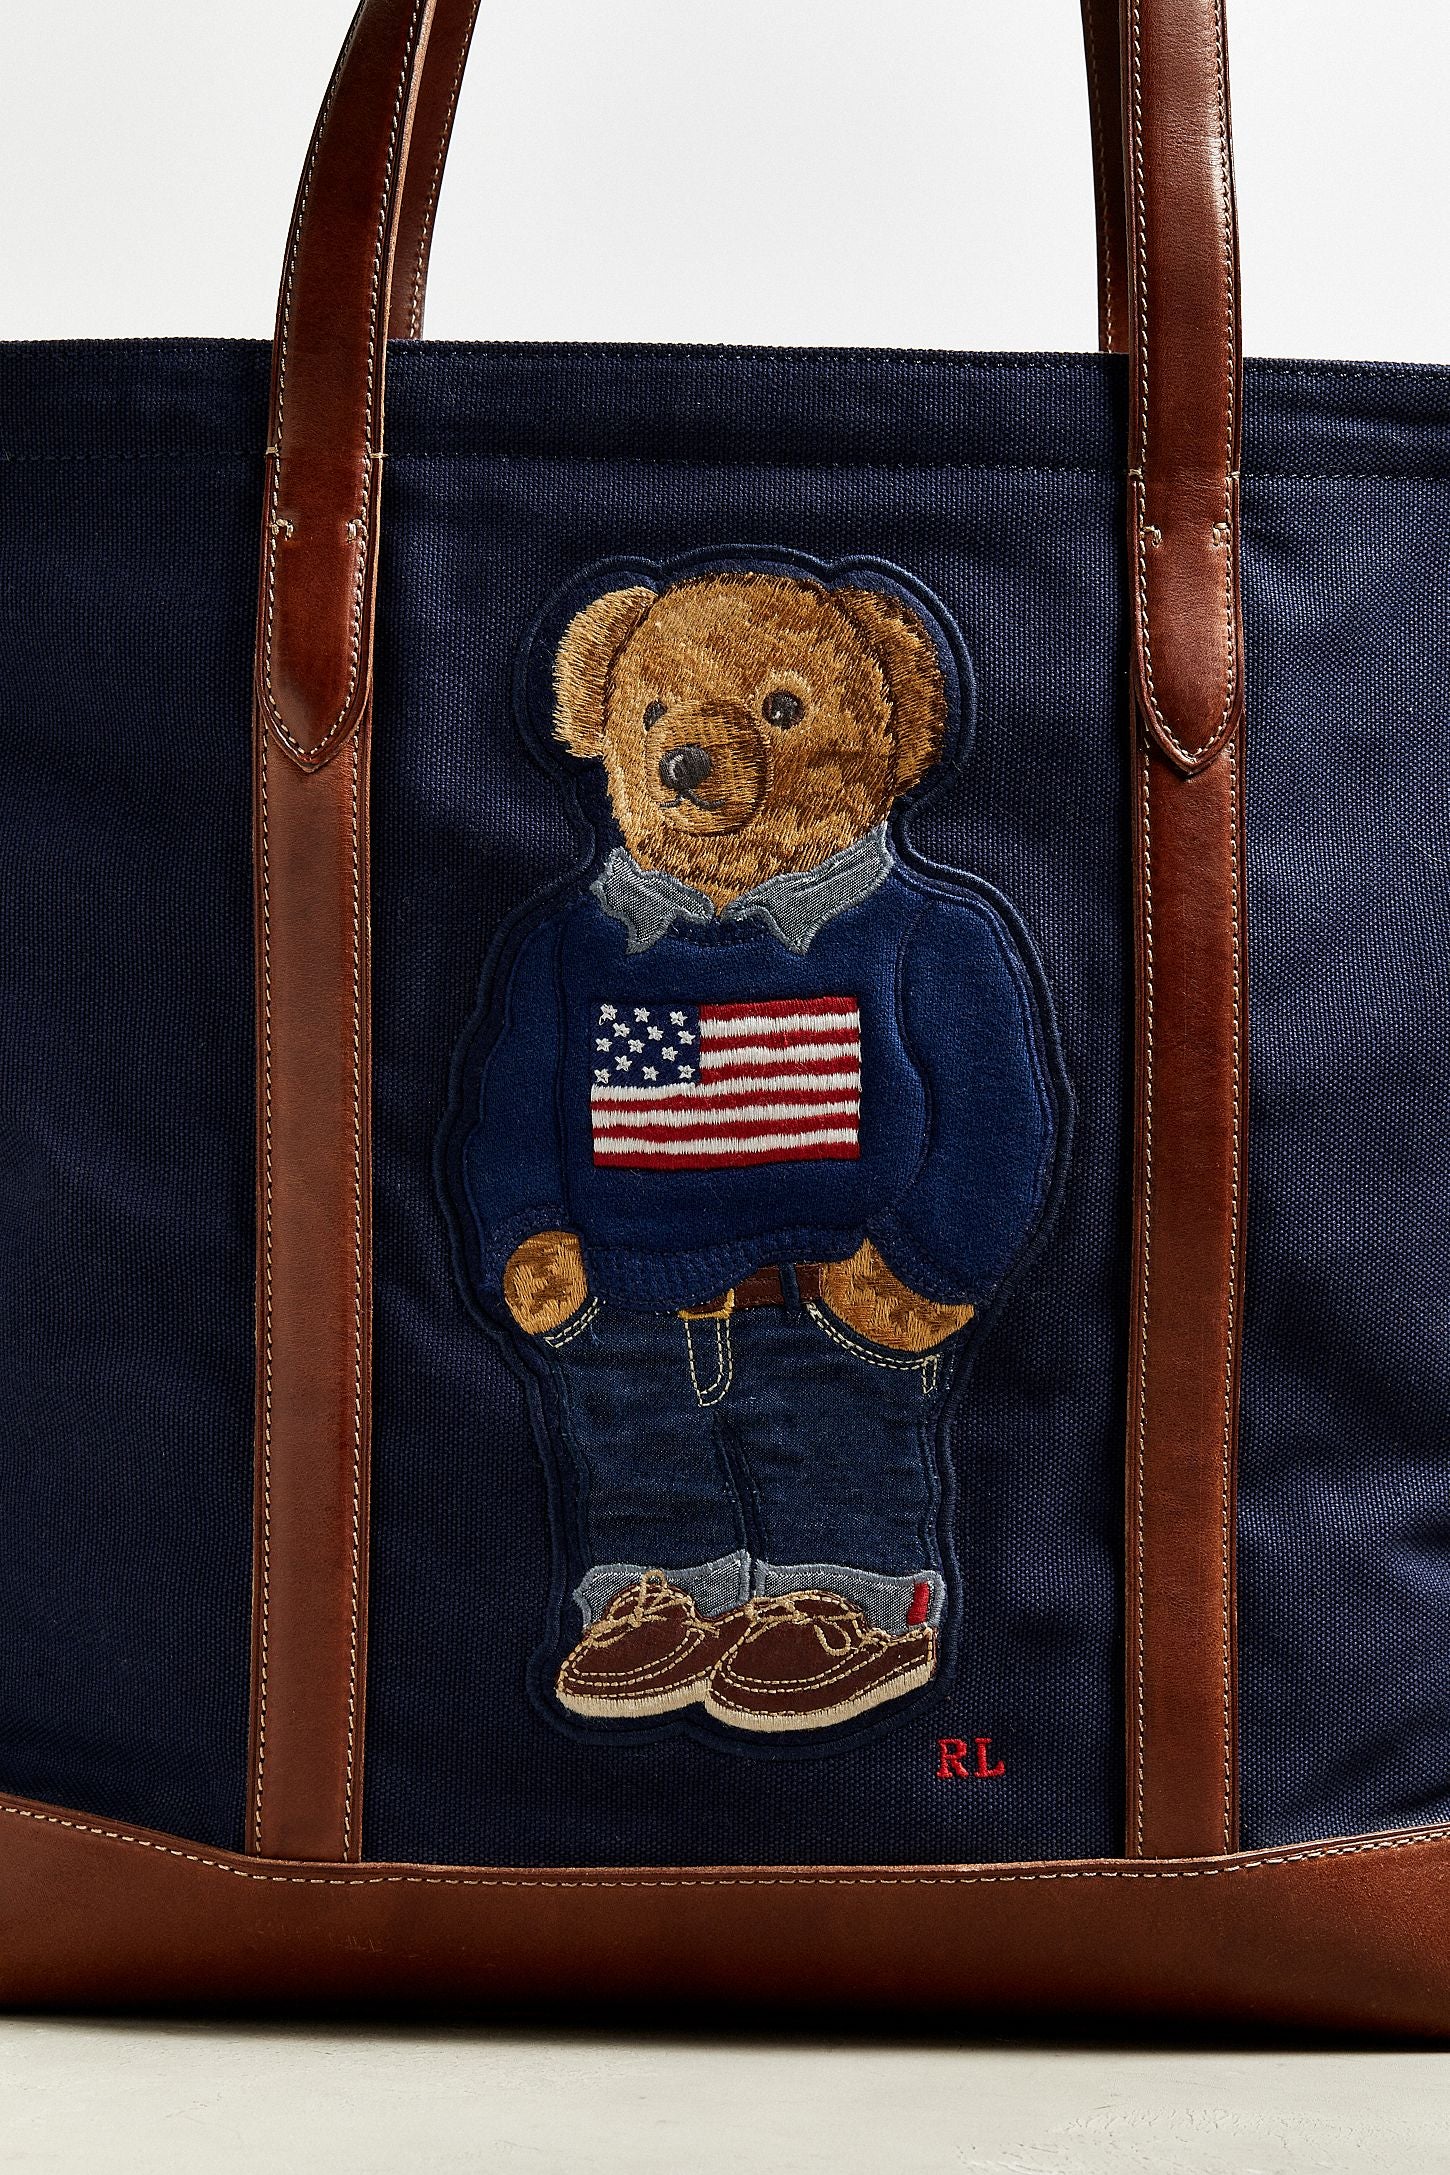 Polo Ralph Lauren tote bag in navy with bear logo